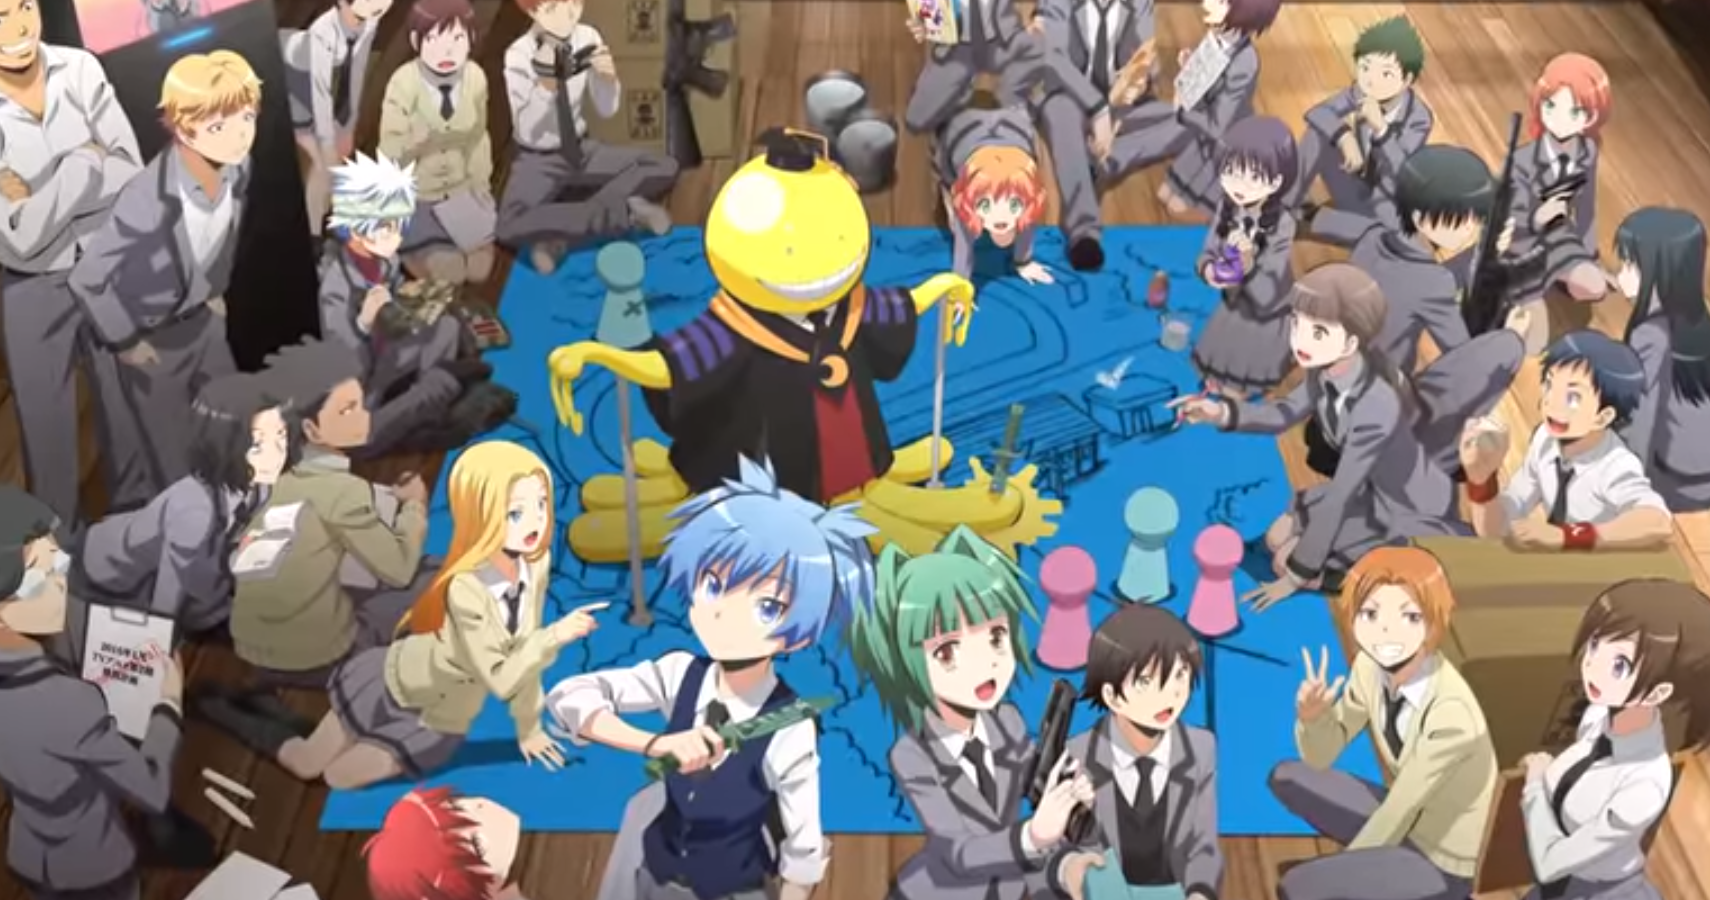 Which Assassination Classroom Character Are You Based On Your Zodiac Sign